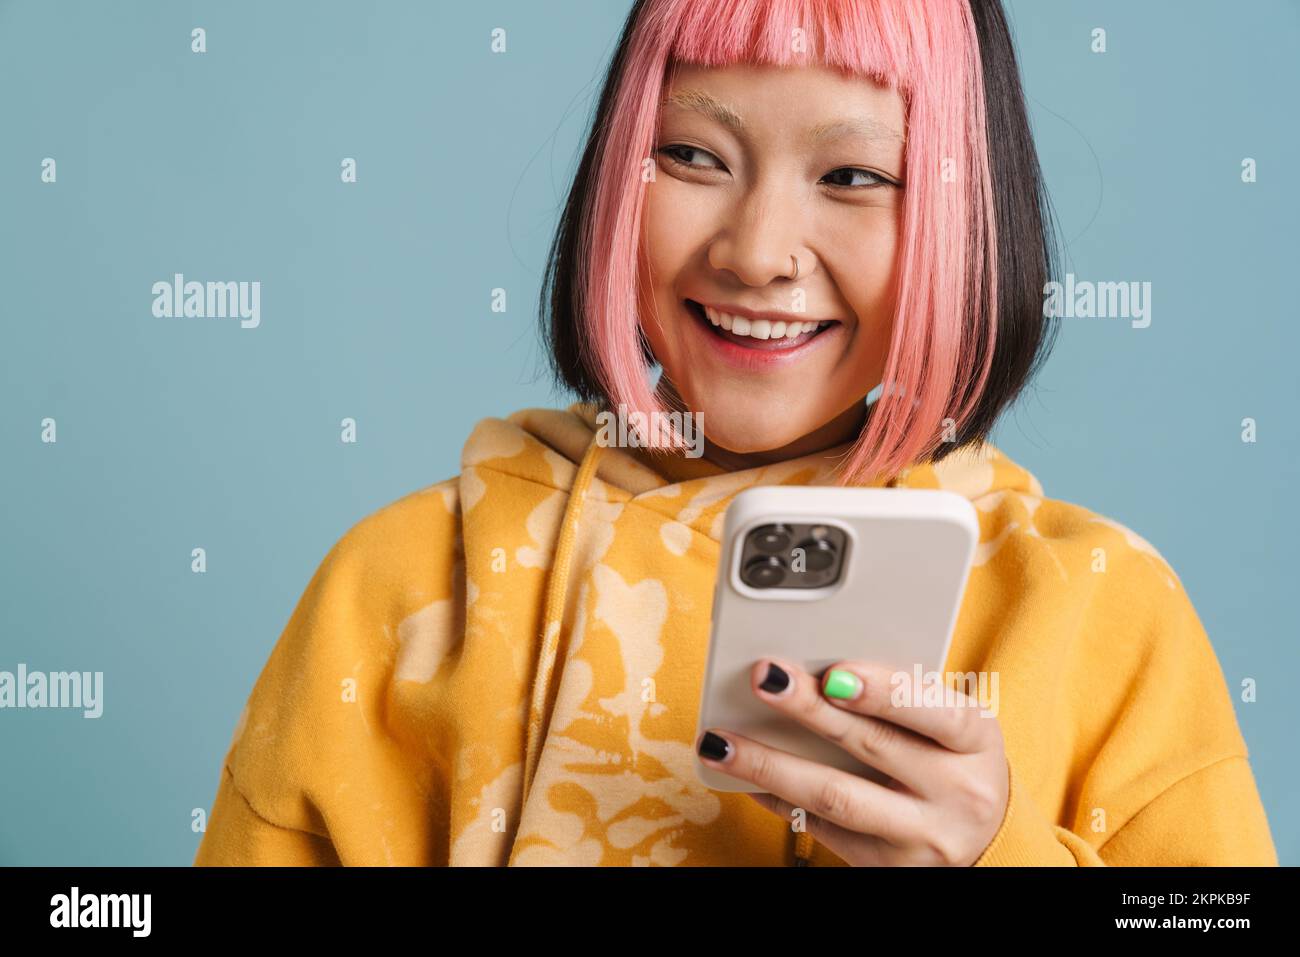 Asian girl with pink hair smiling and using mobile phone isolated over blue background Stock Photo